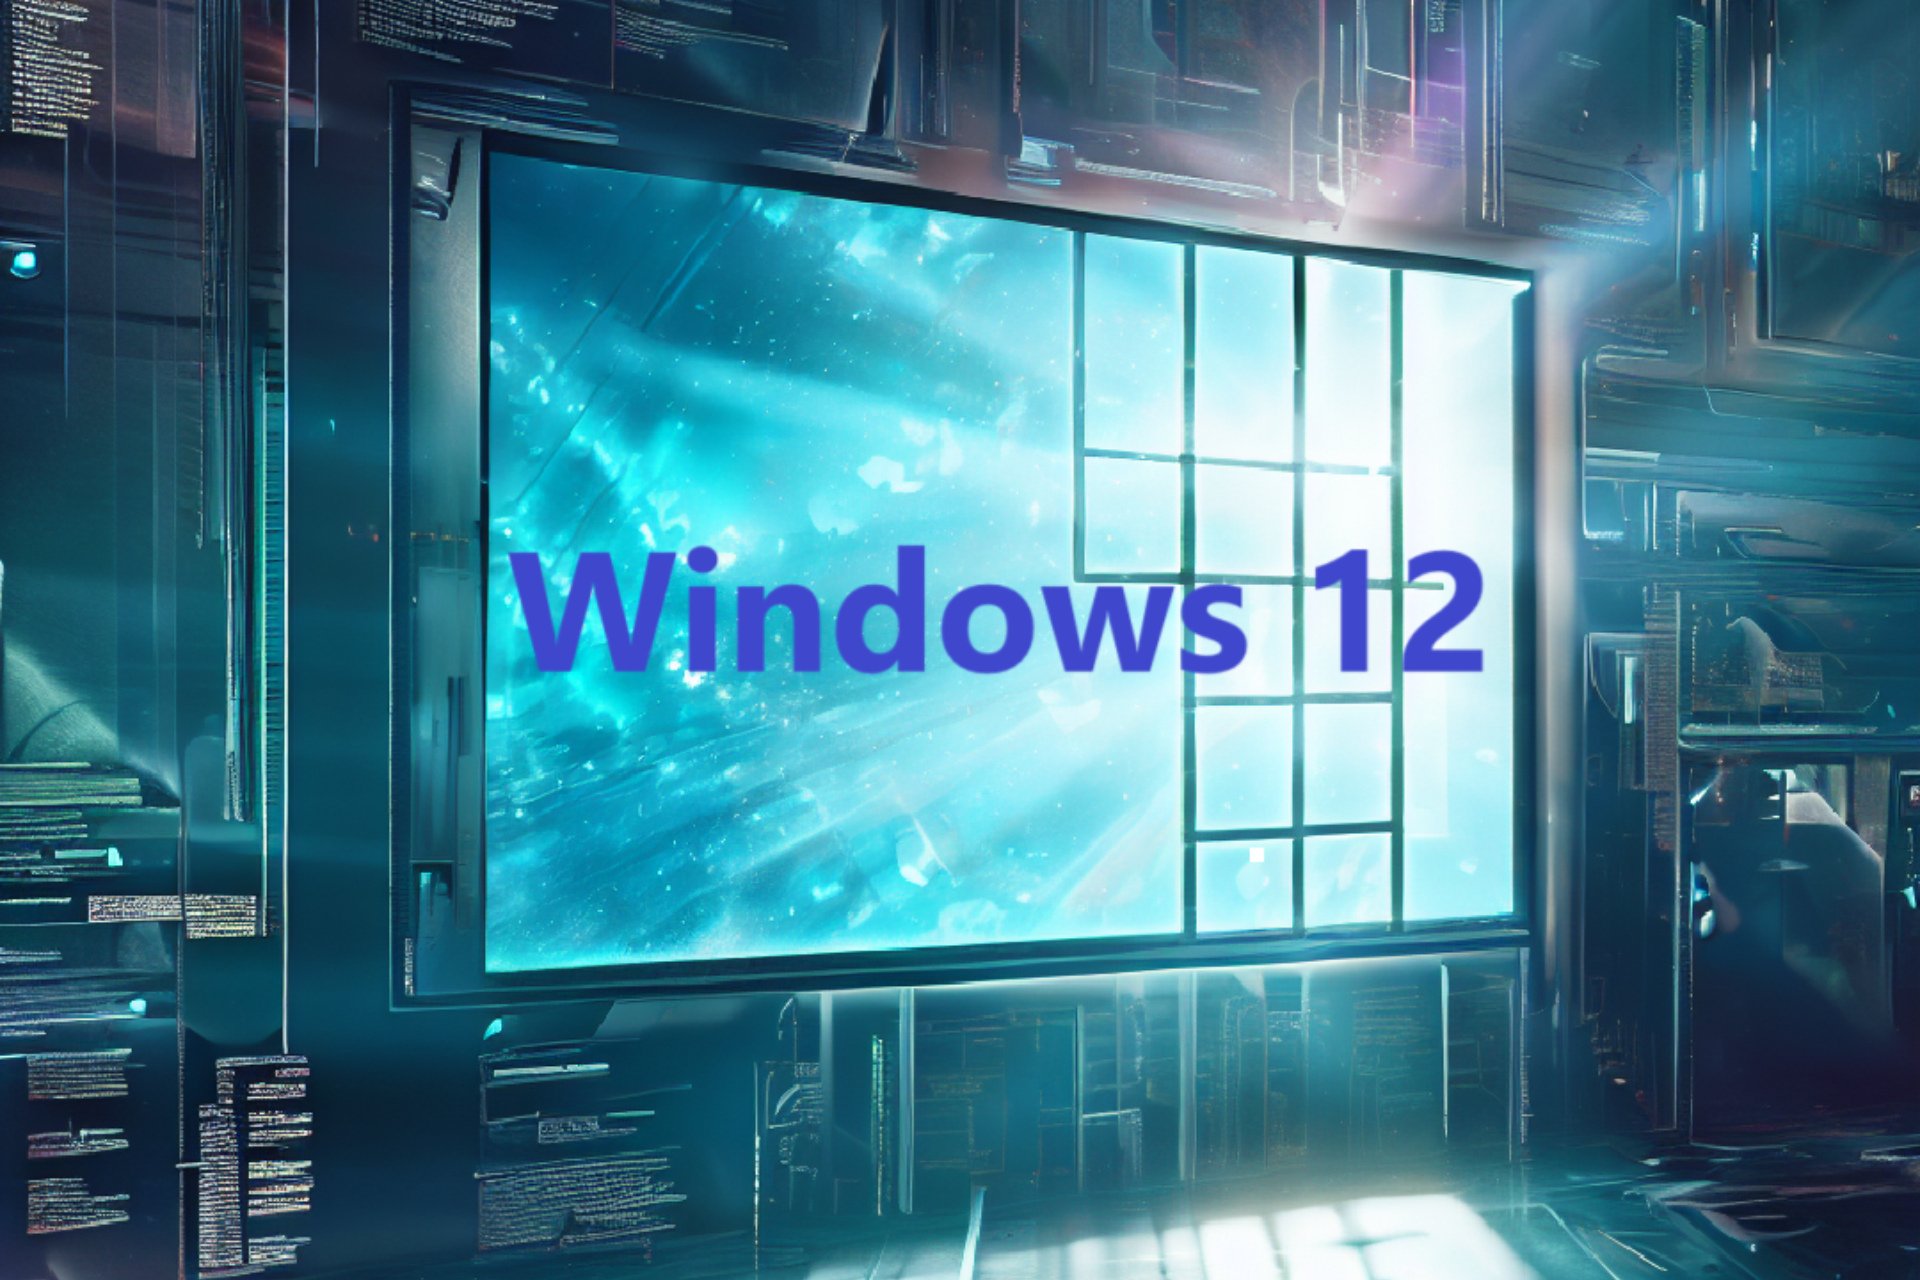 Here is why Microsoft won't launch Windows 12 too soon